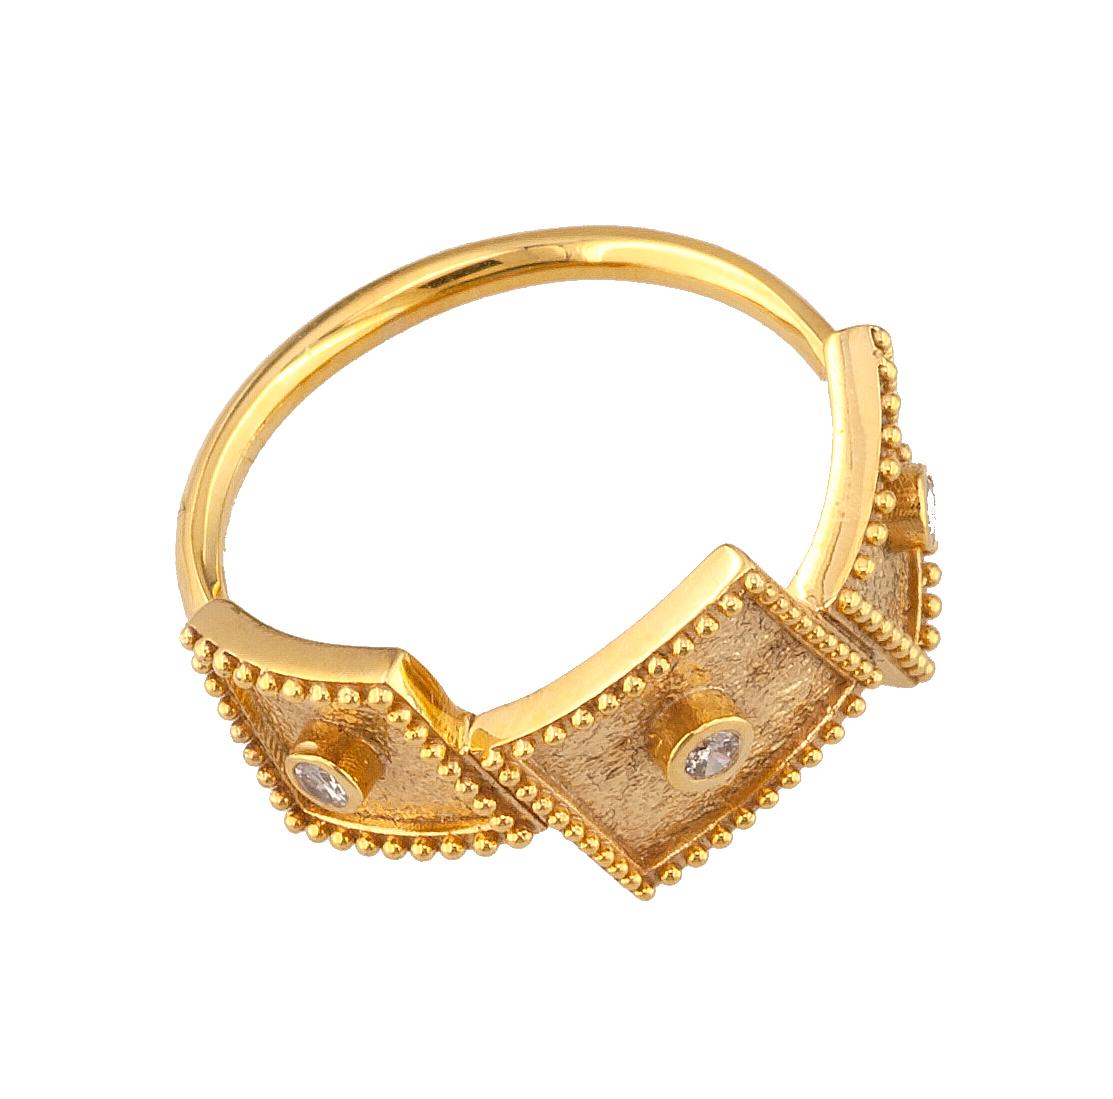 S.Georgios designer thin band ring is 18 Karat yellow gold and microscopically decorated with hand-made granulation workmanship, and finished with a unique contrast velvet look. This beautiful thin band ring features 3 brilliant-cut White Diamonds